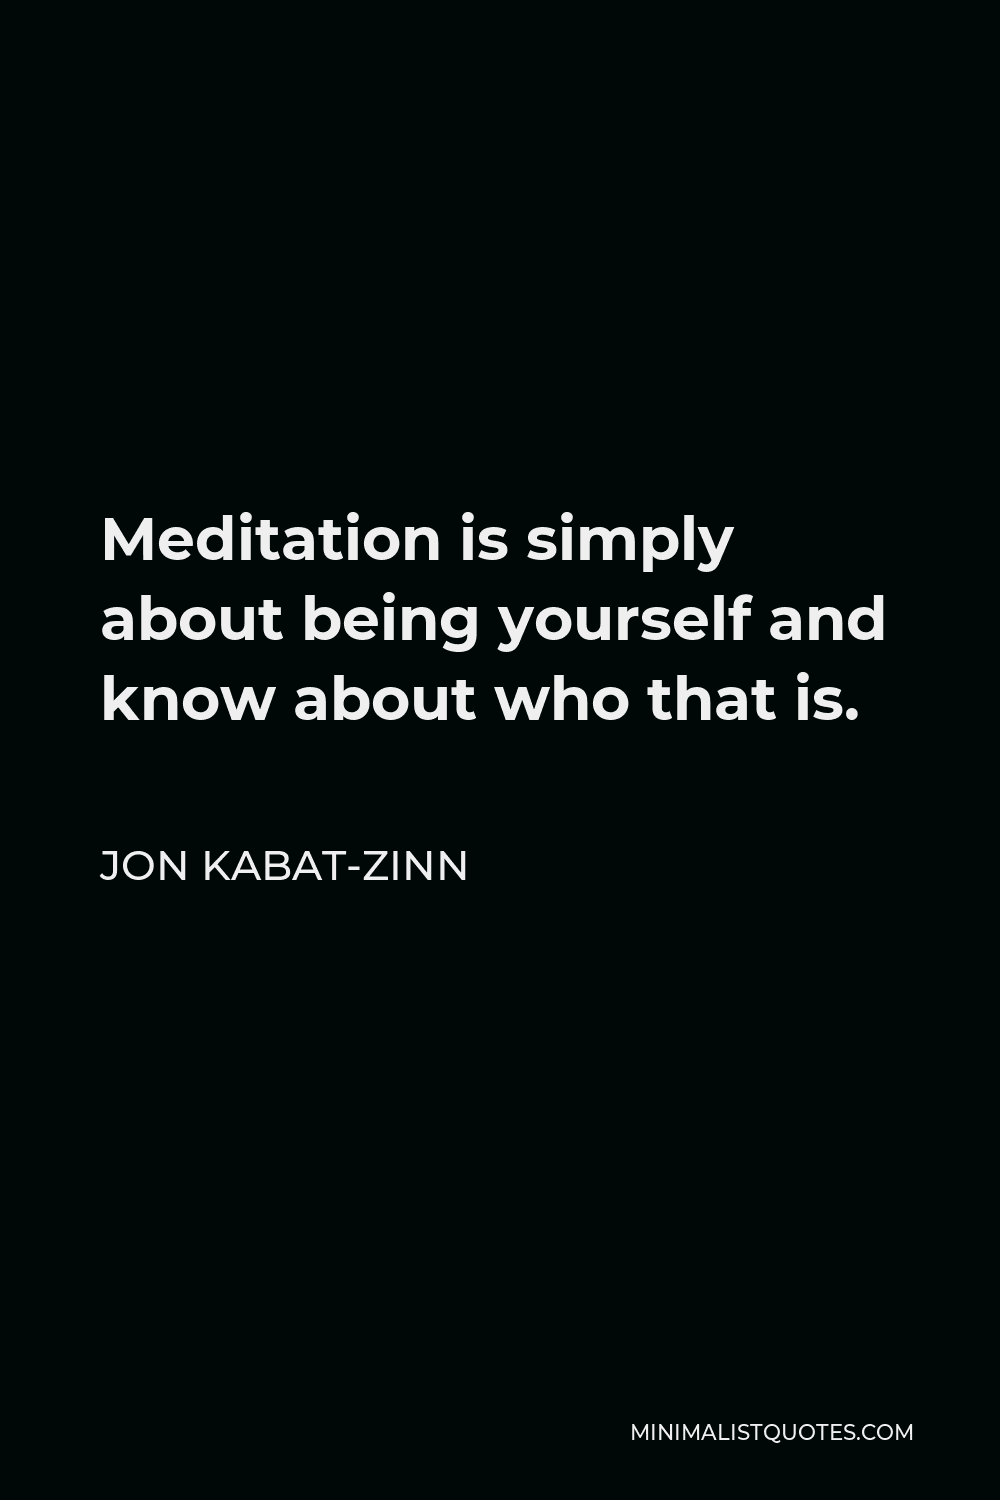 Jon Kabat-Zinn Quote - Meditation is simply about being yourself and know about who that is.